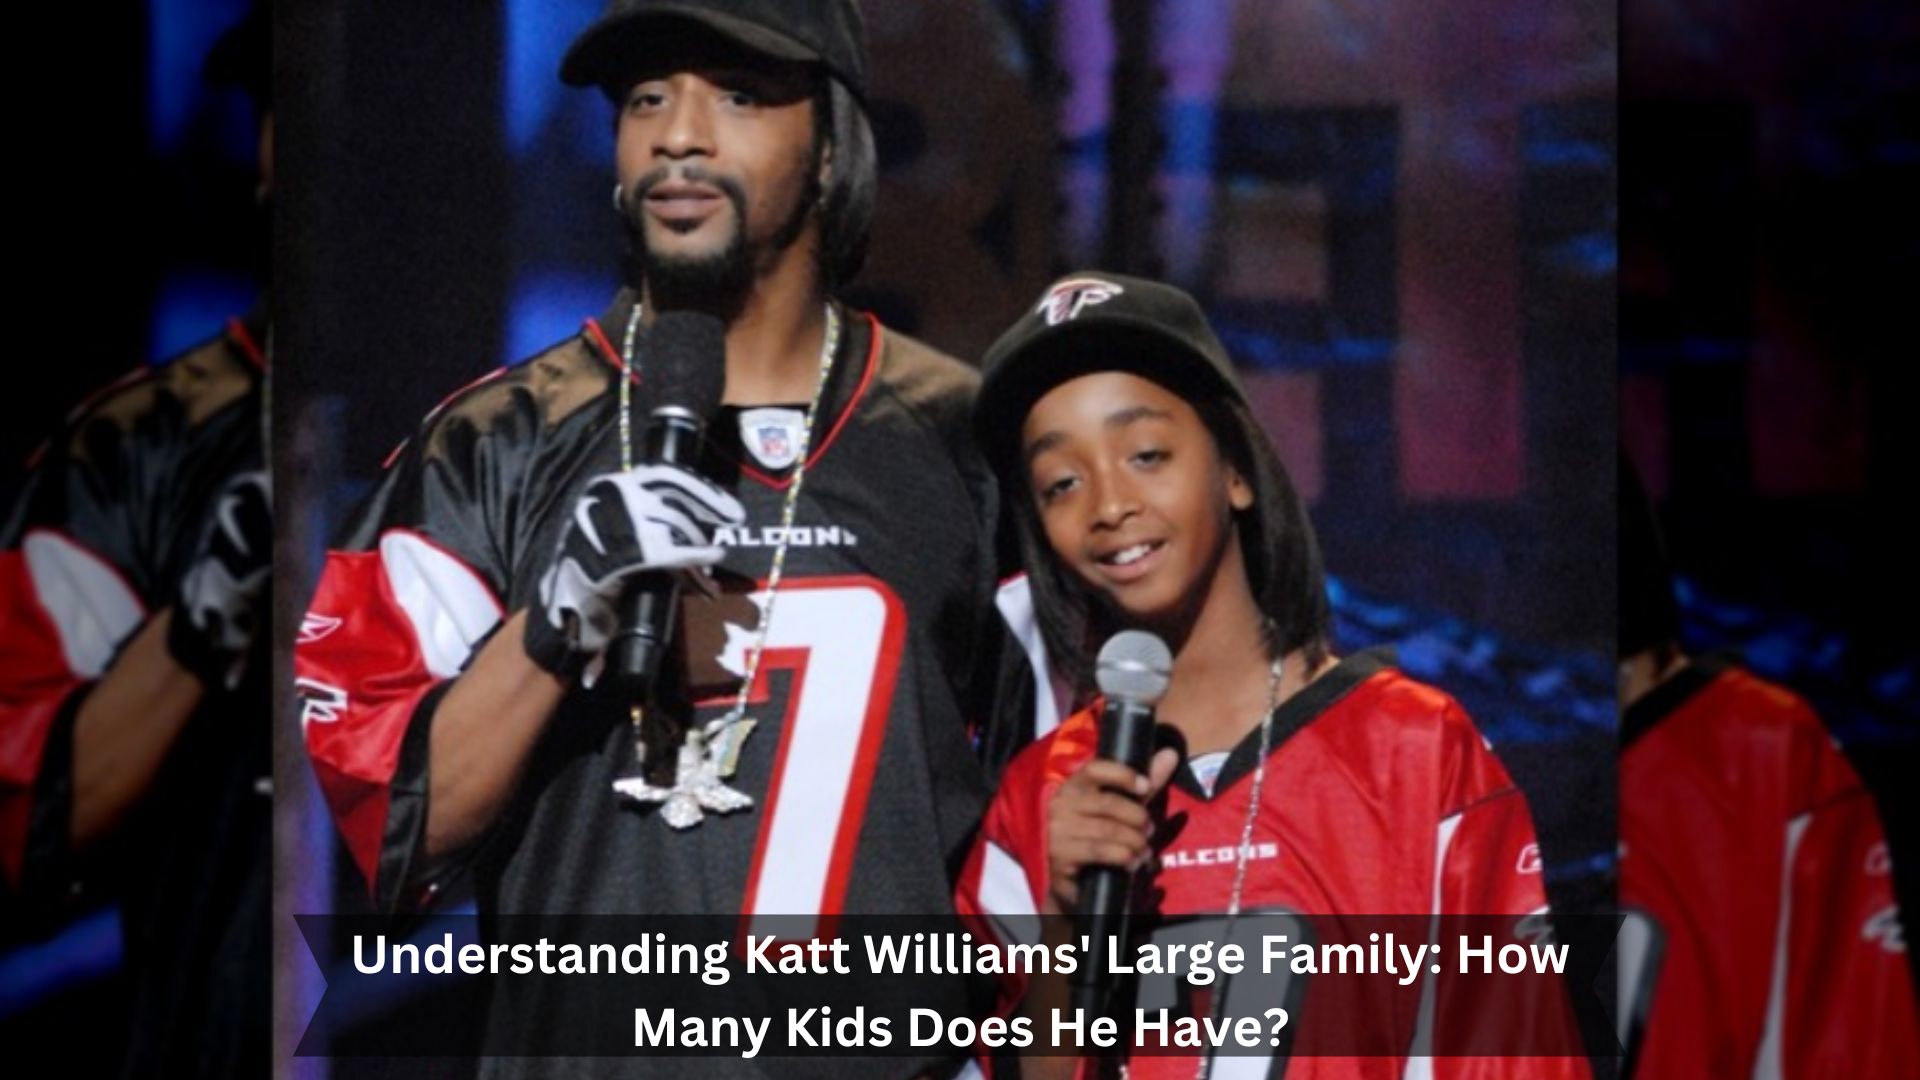 Understanding-Katt-Williams-Large-Family-How-Many-Kids-Does-He-Have